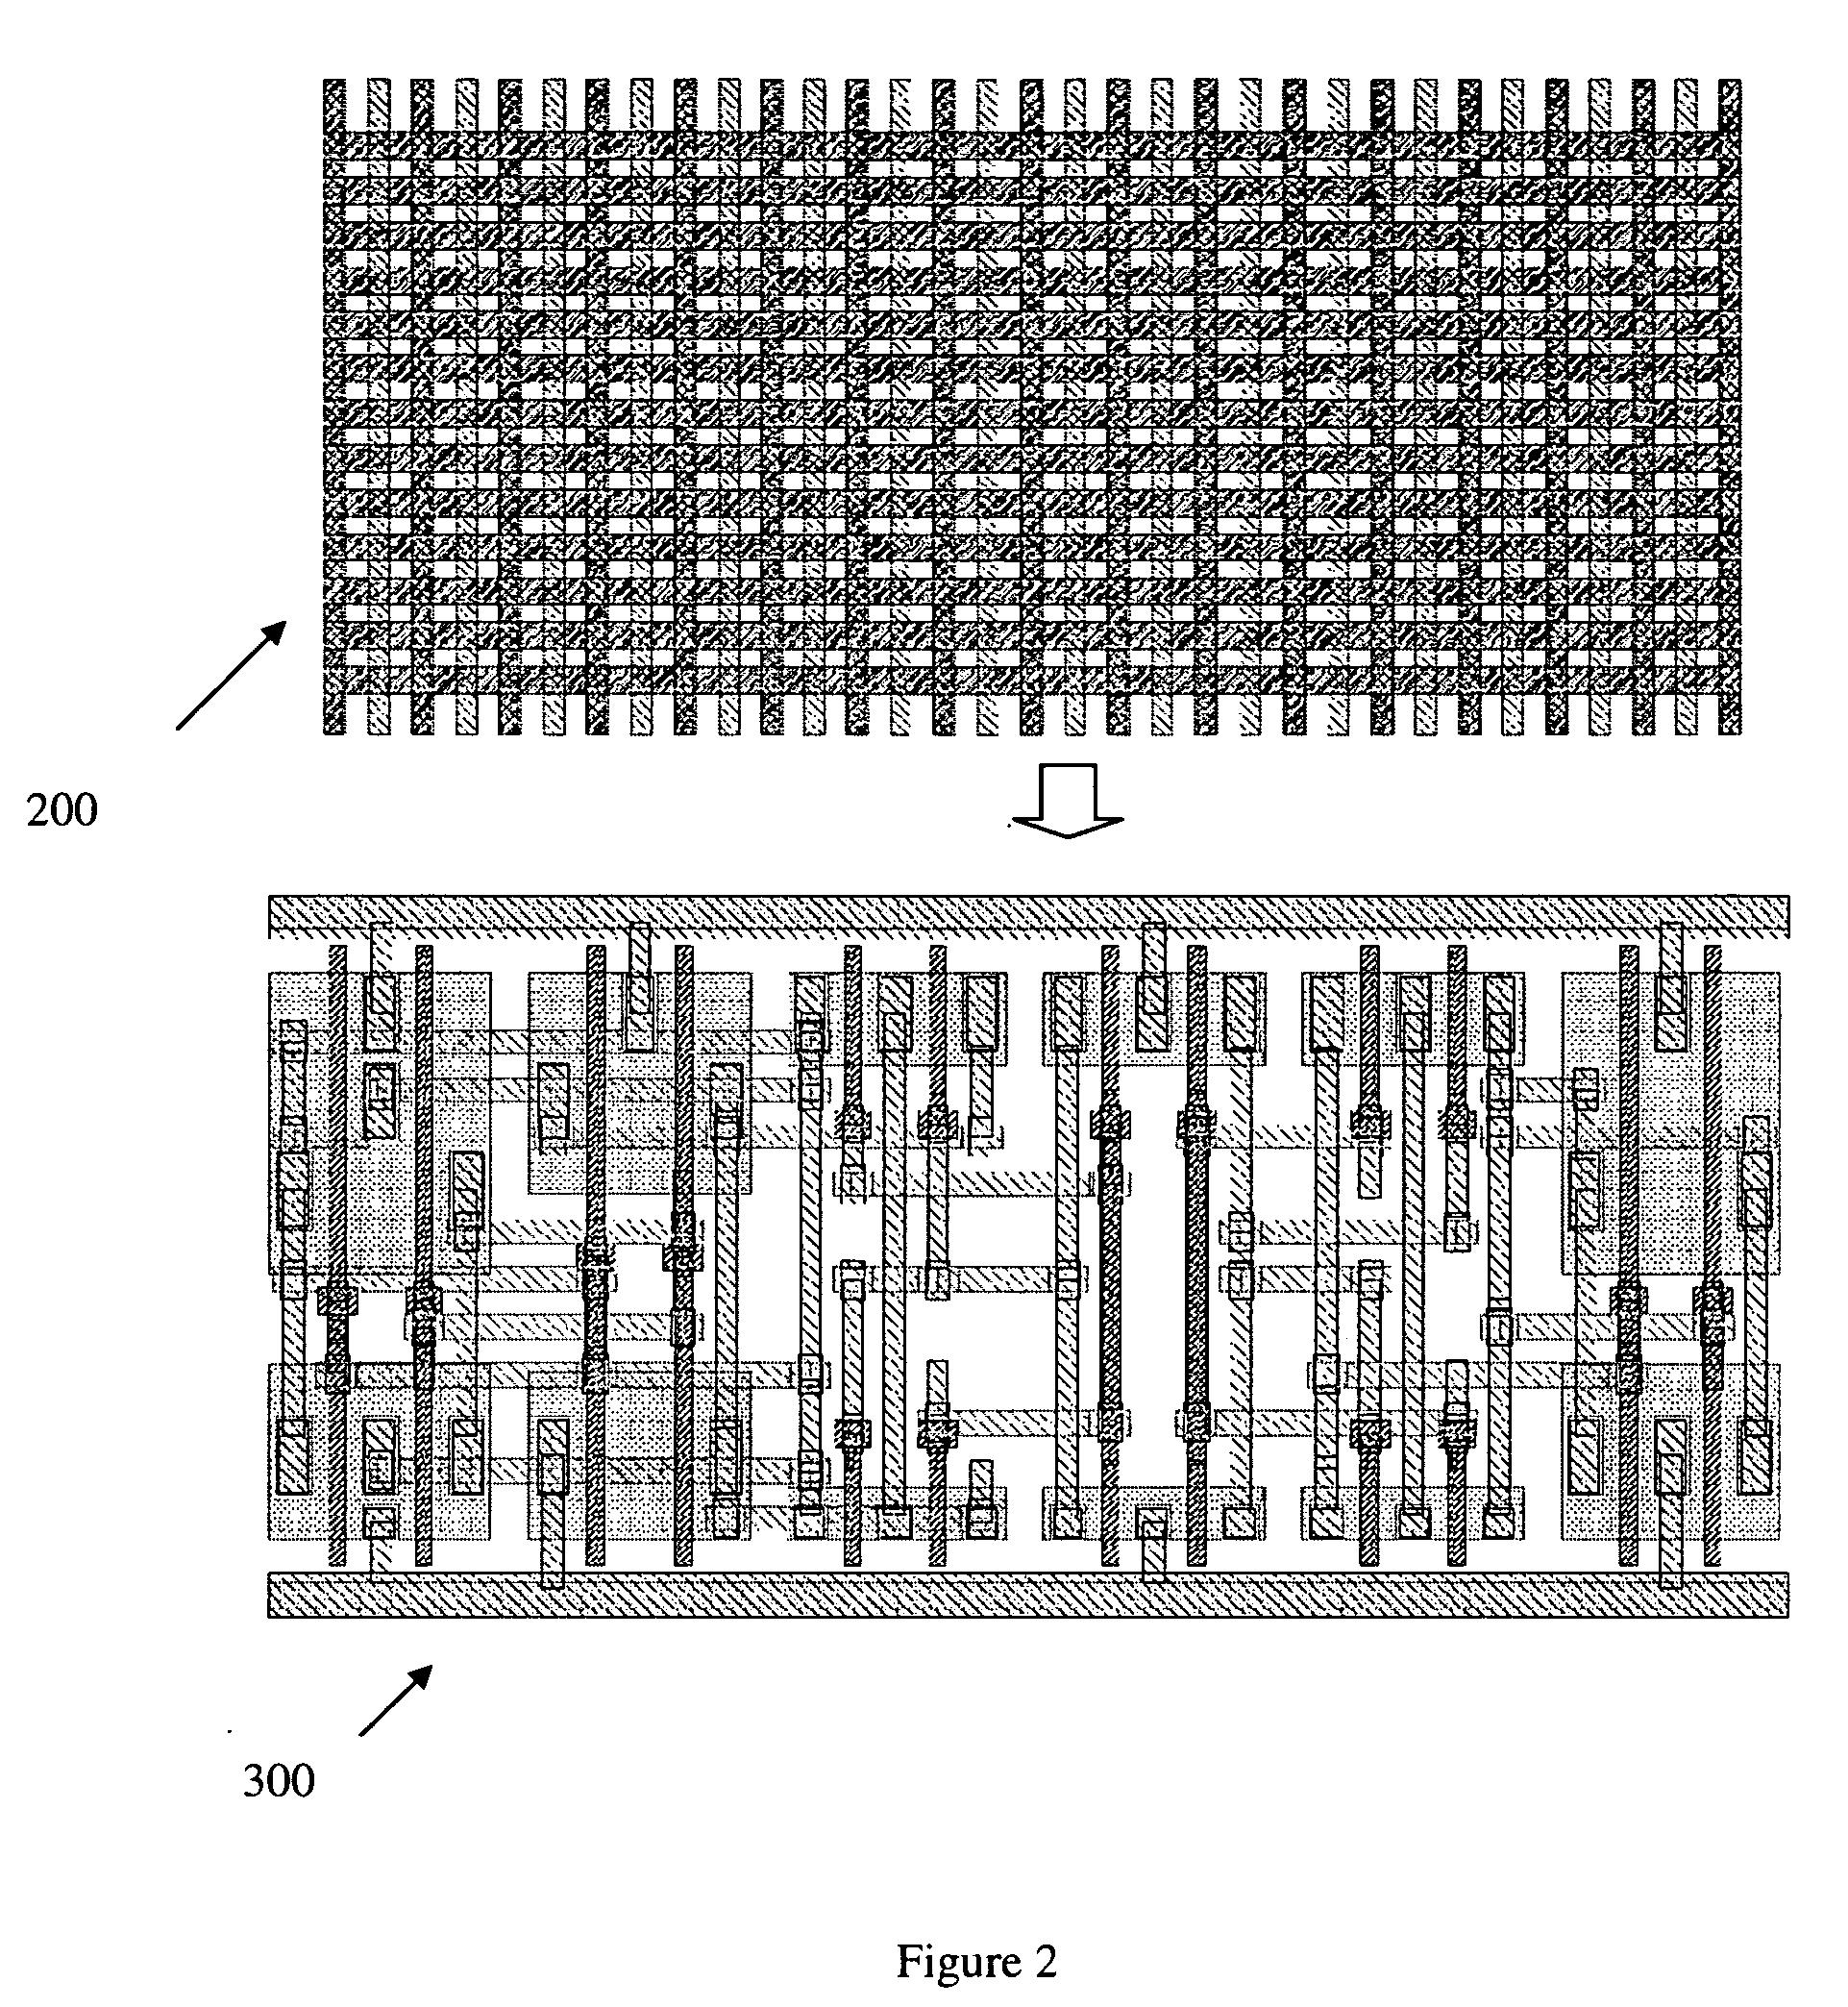 Method and process for design of integrated circuits using regular geometry patterns to obtain geometrically consistent component features